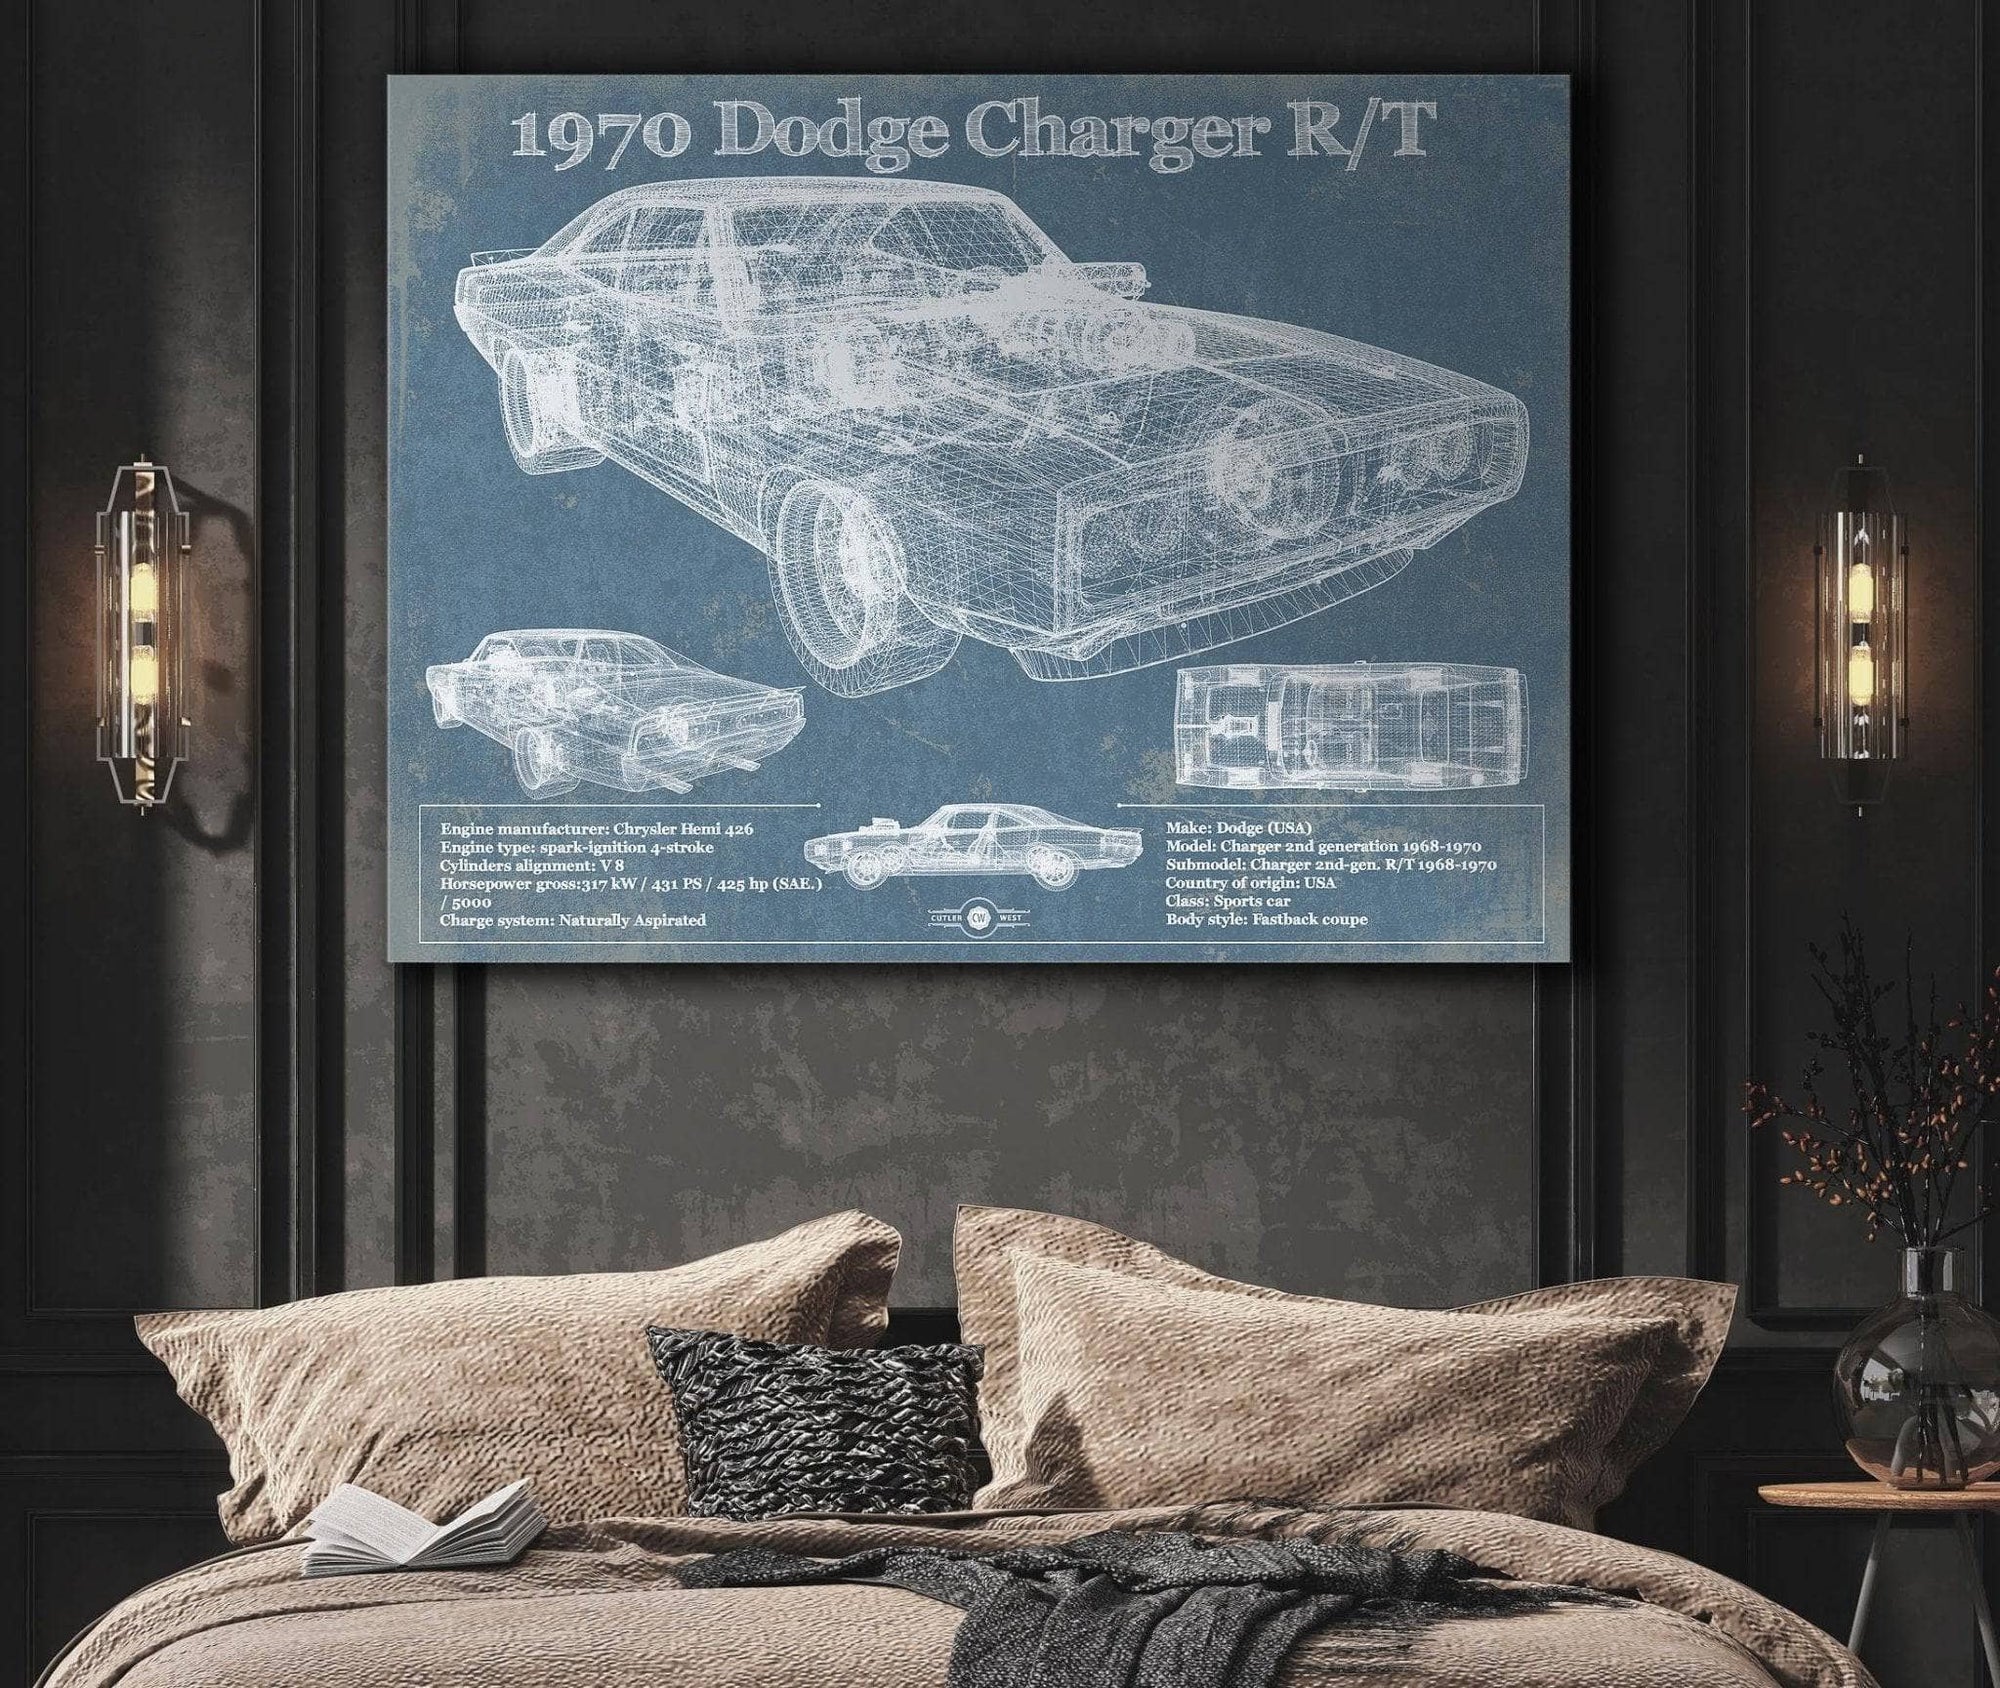 Cutler West Dodge Collection Dodge Charger 1970 R/T (Fast and Furious) Sports Car Blueprint Patent Original Art